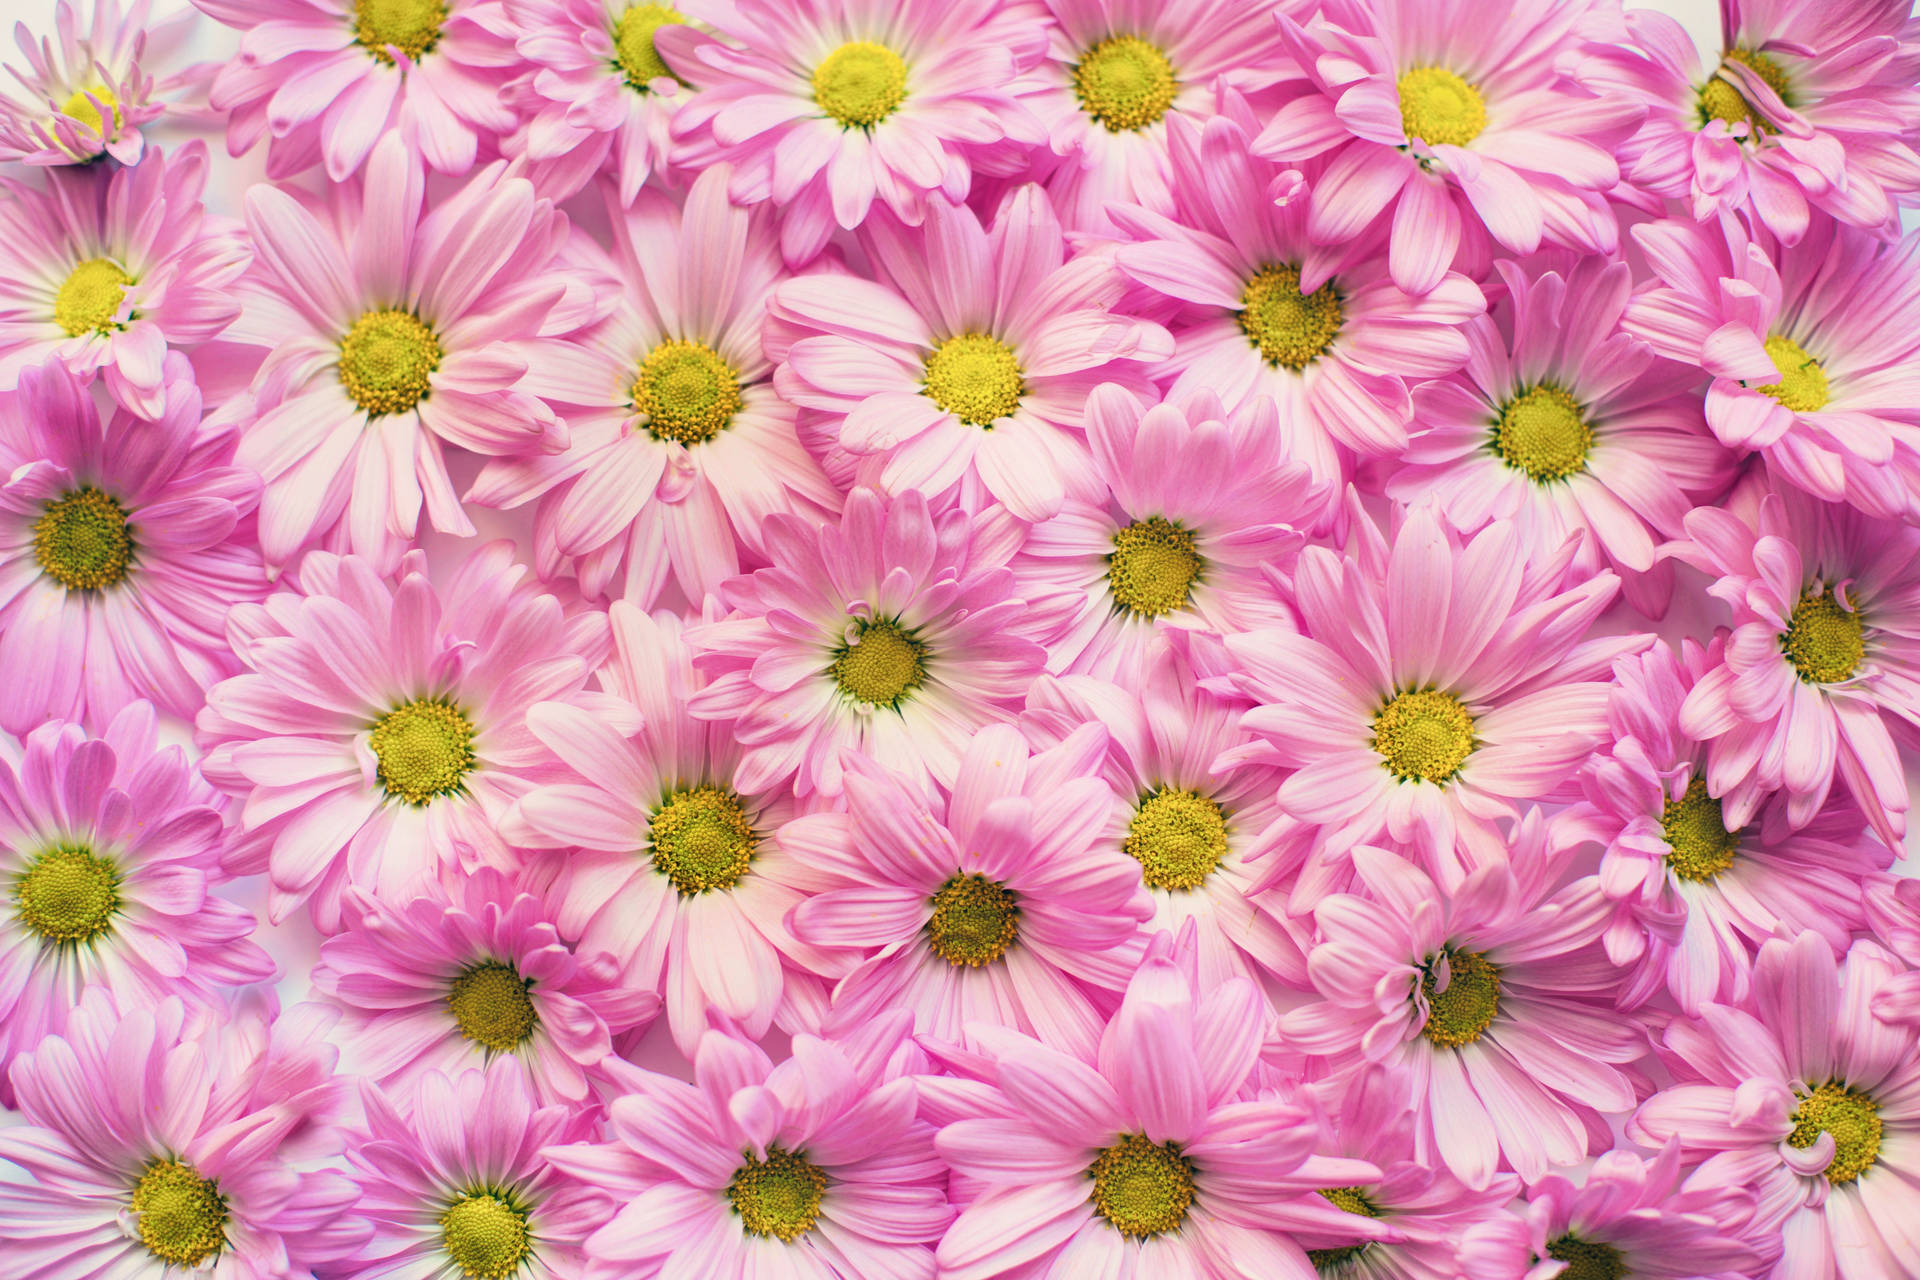 Download Pink Daisy Flowers Background Wallpaper | Wallpapers.com